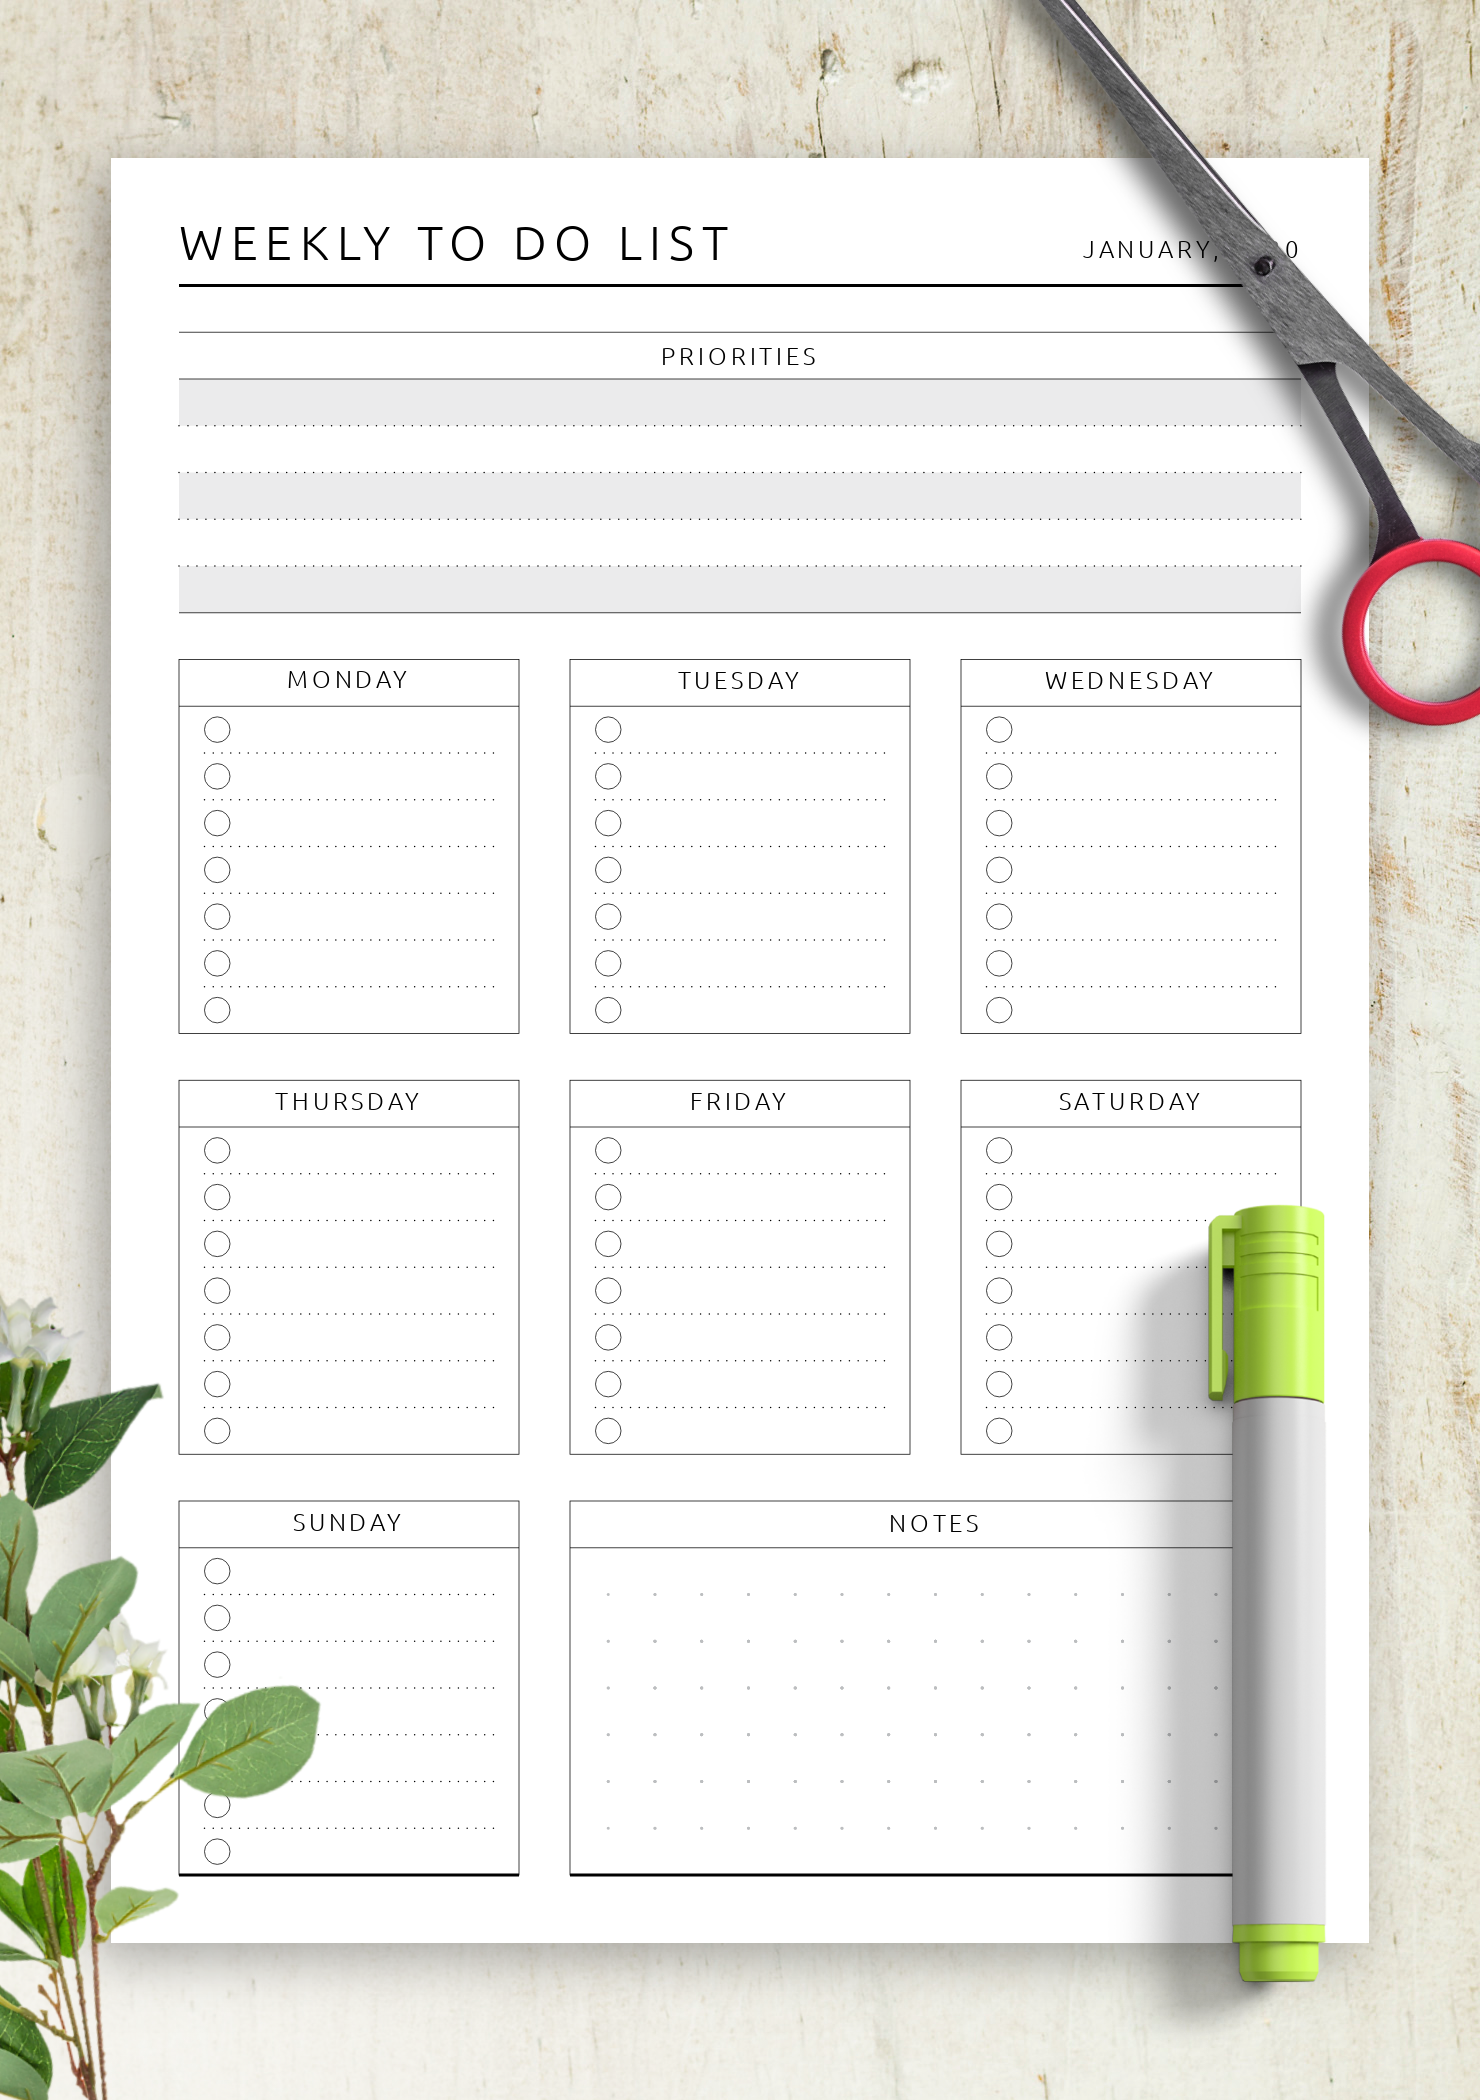 Free Printable Daily Weekly To Do List For Template C - vrogue.co